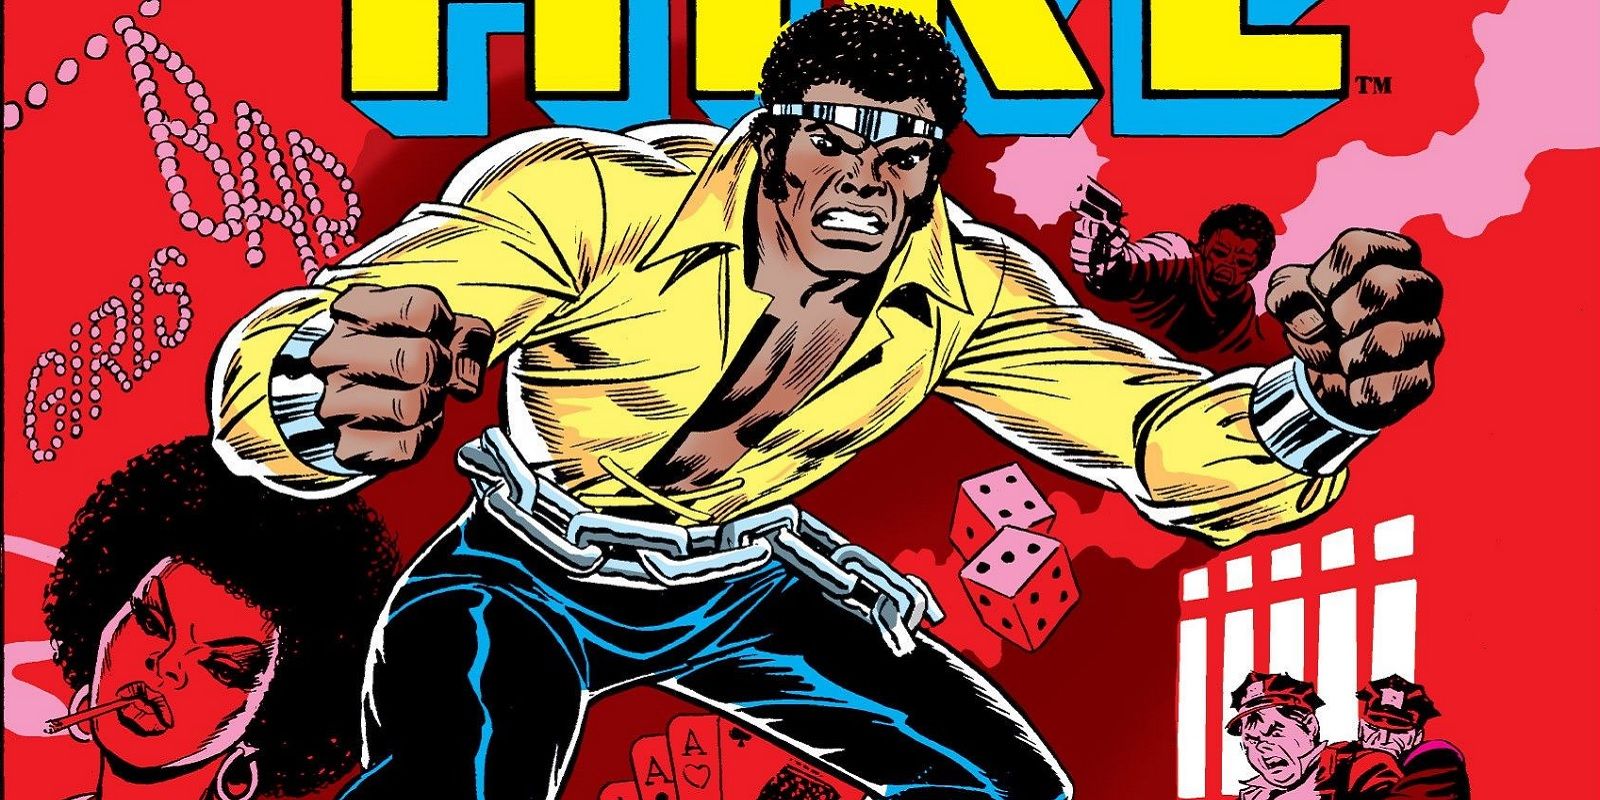 Luke Cage doing a menacing pose on the cover of Hero for Hire